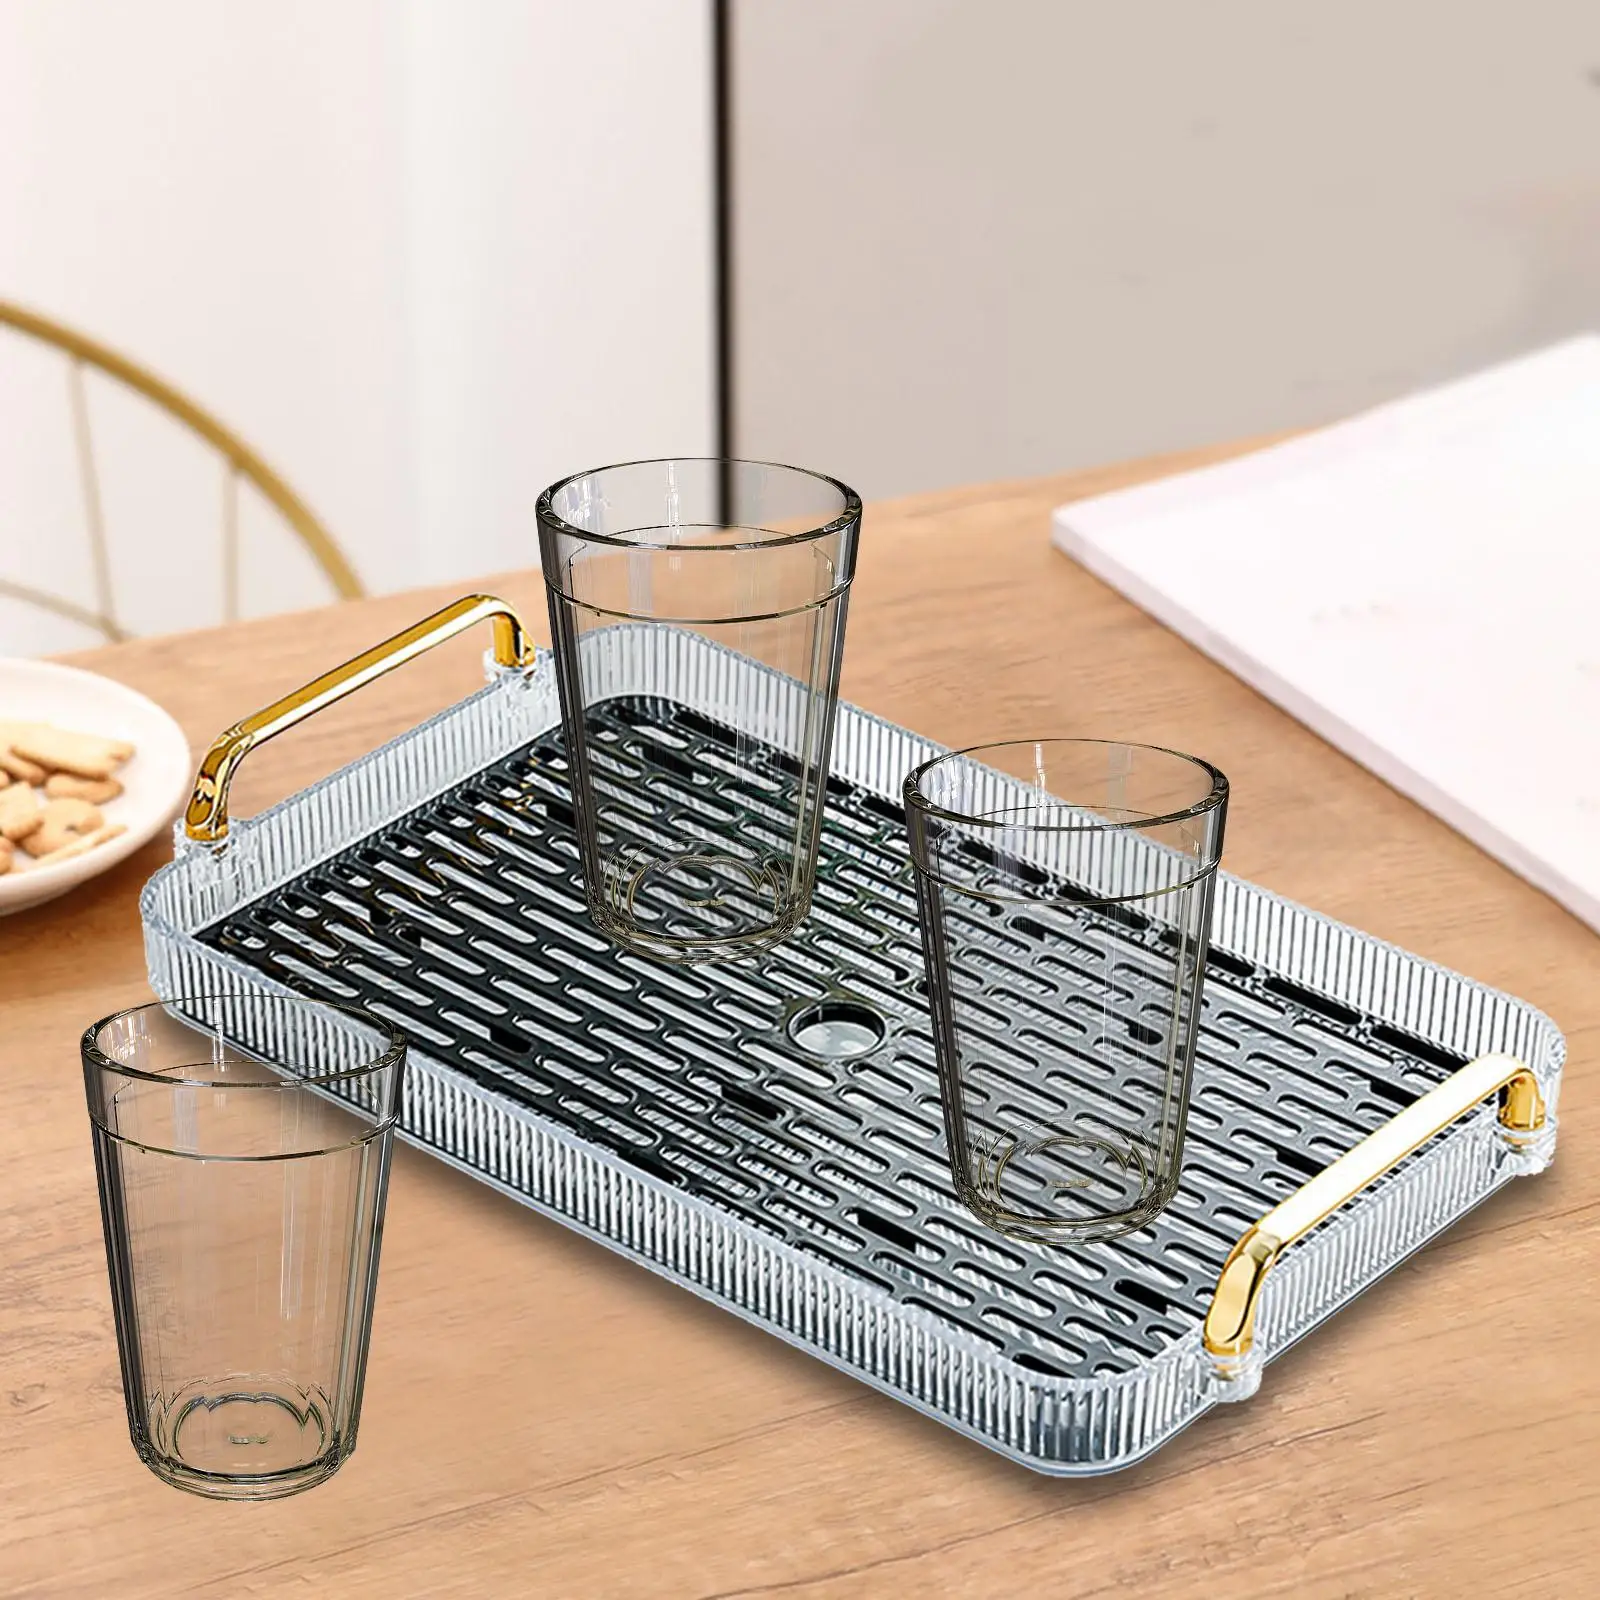 Drainage Serving Tray Lightweight Kitchen Storage Holder for Bedroom Office